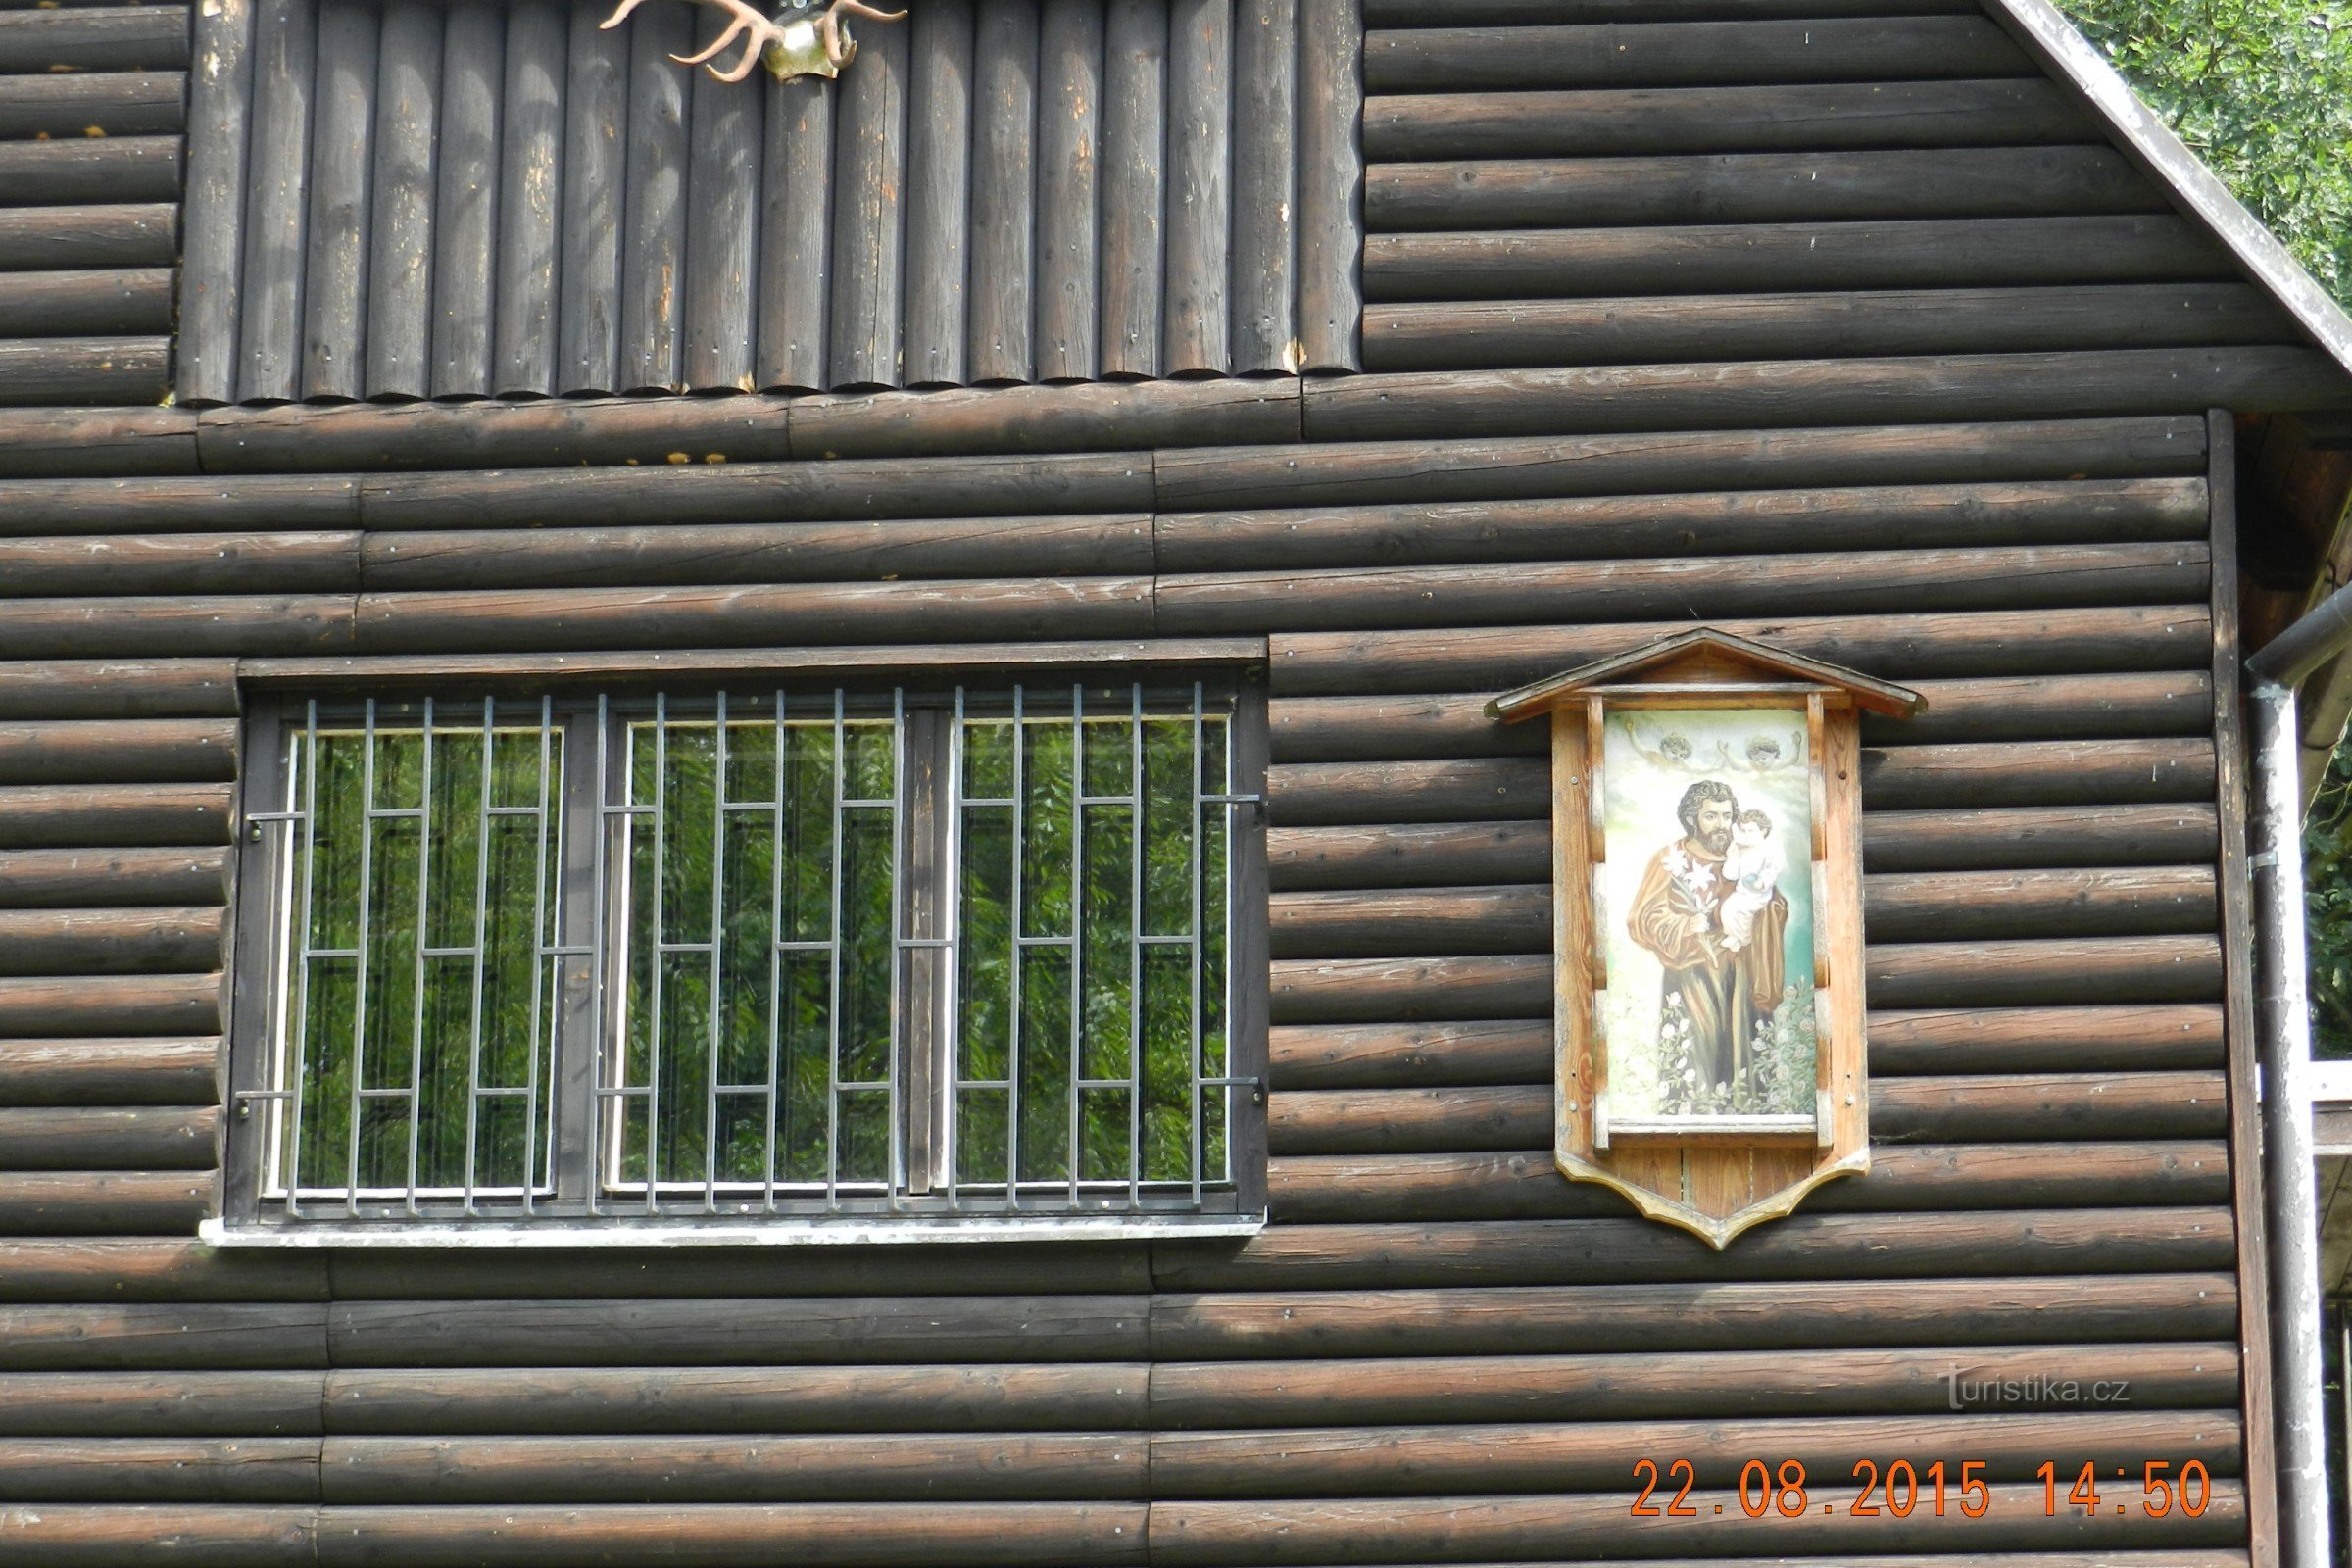 Hrabová, Dubicko - hunting lodge of St. Joseph (excursion with stroller, roasting after